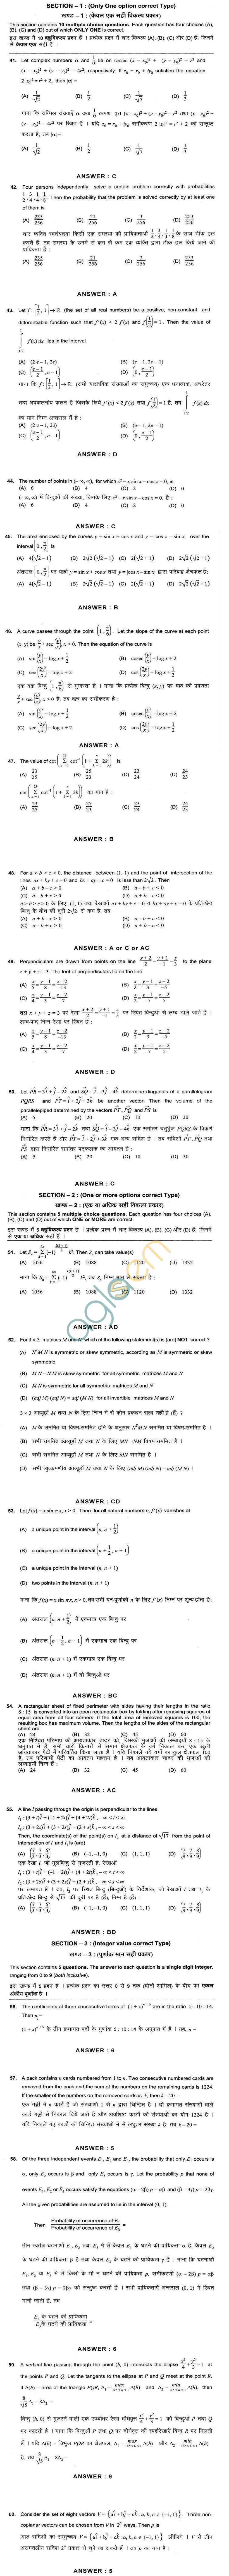 JEE Advanced 2017 Maths Practice Papers